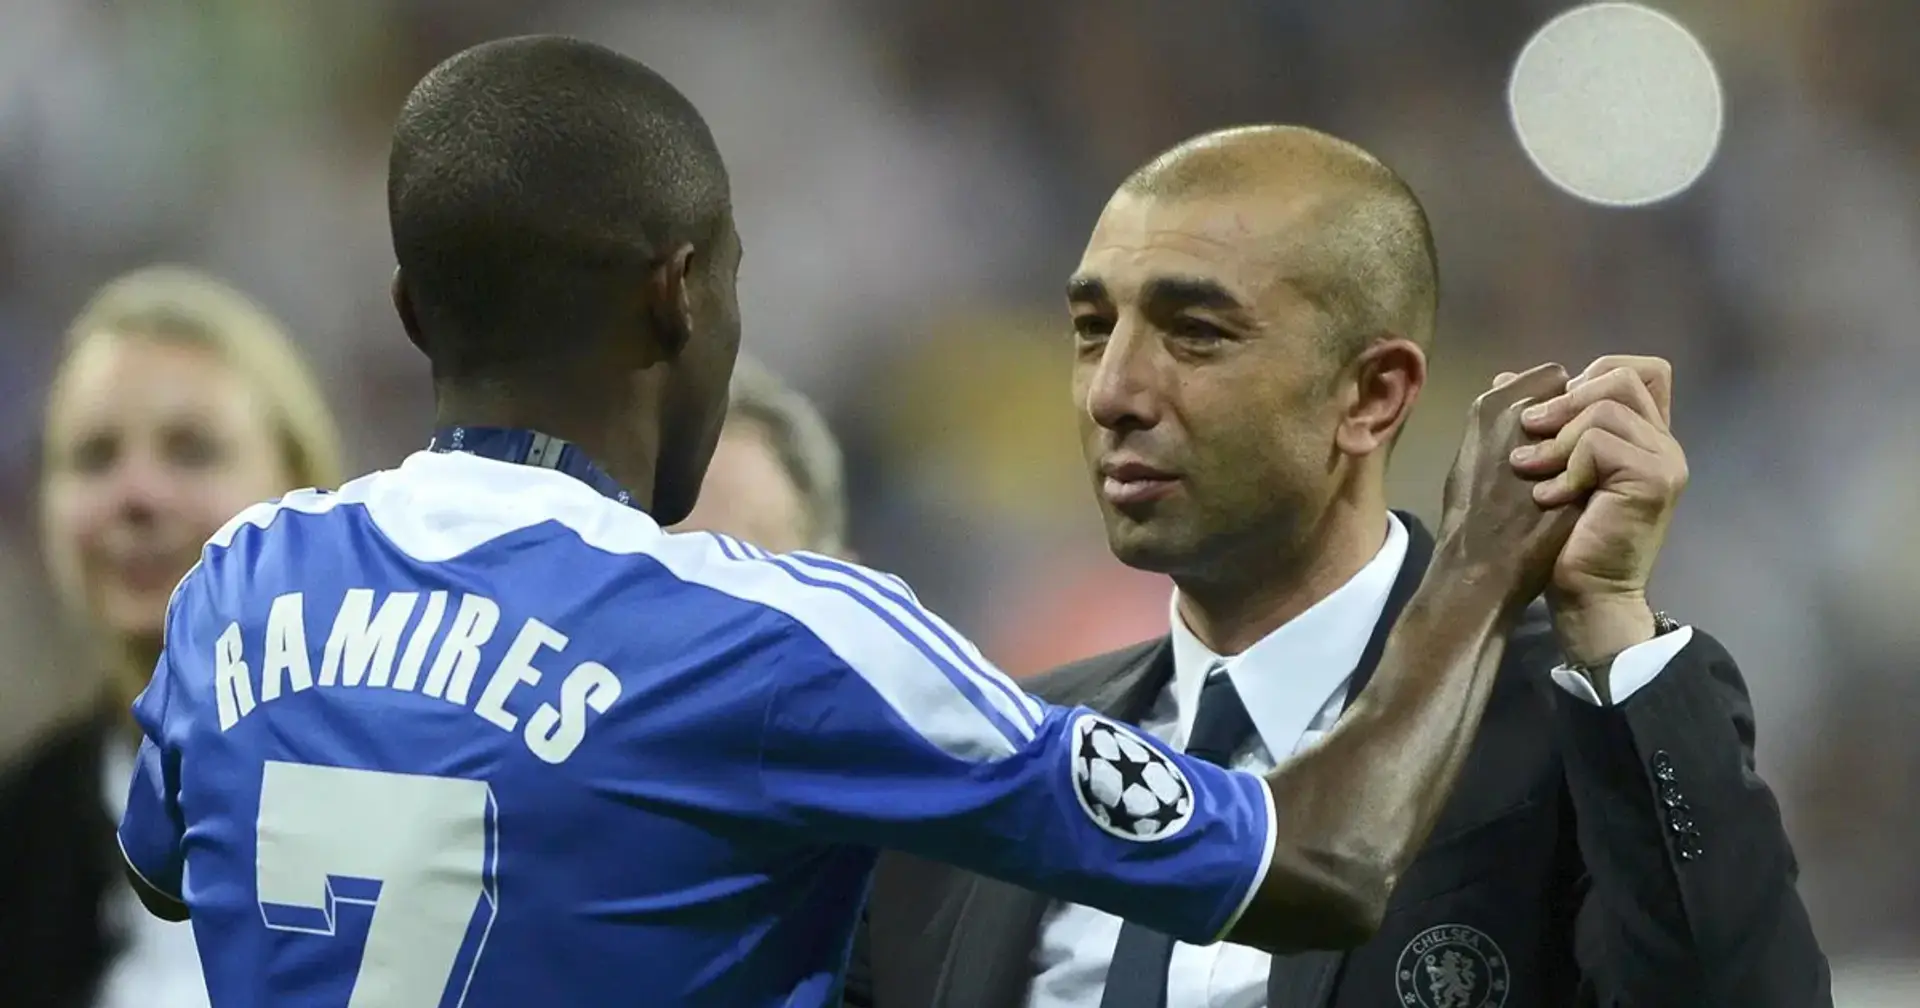 'Di Matteo said I'm out of it': Cruel way Ramires learnt he wouldn't play in 2012 Champions League final